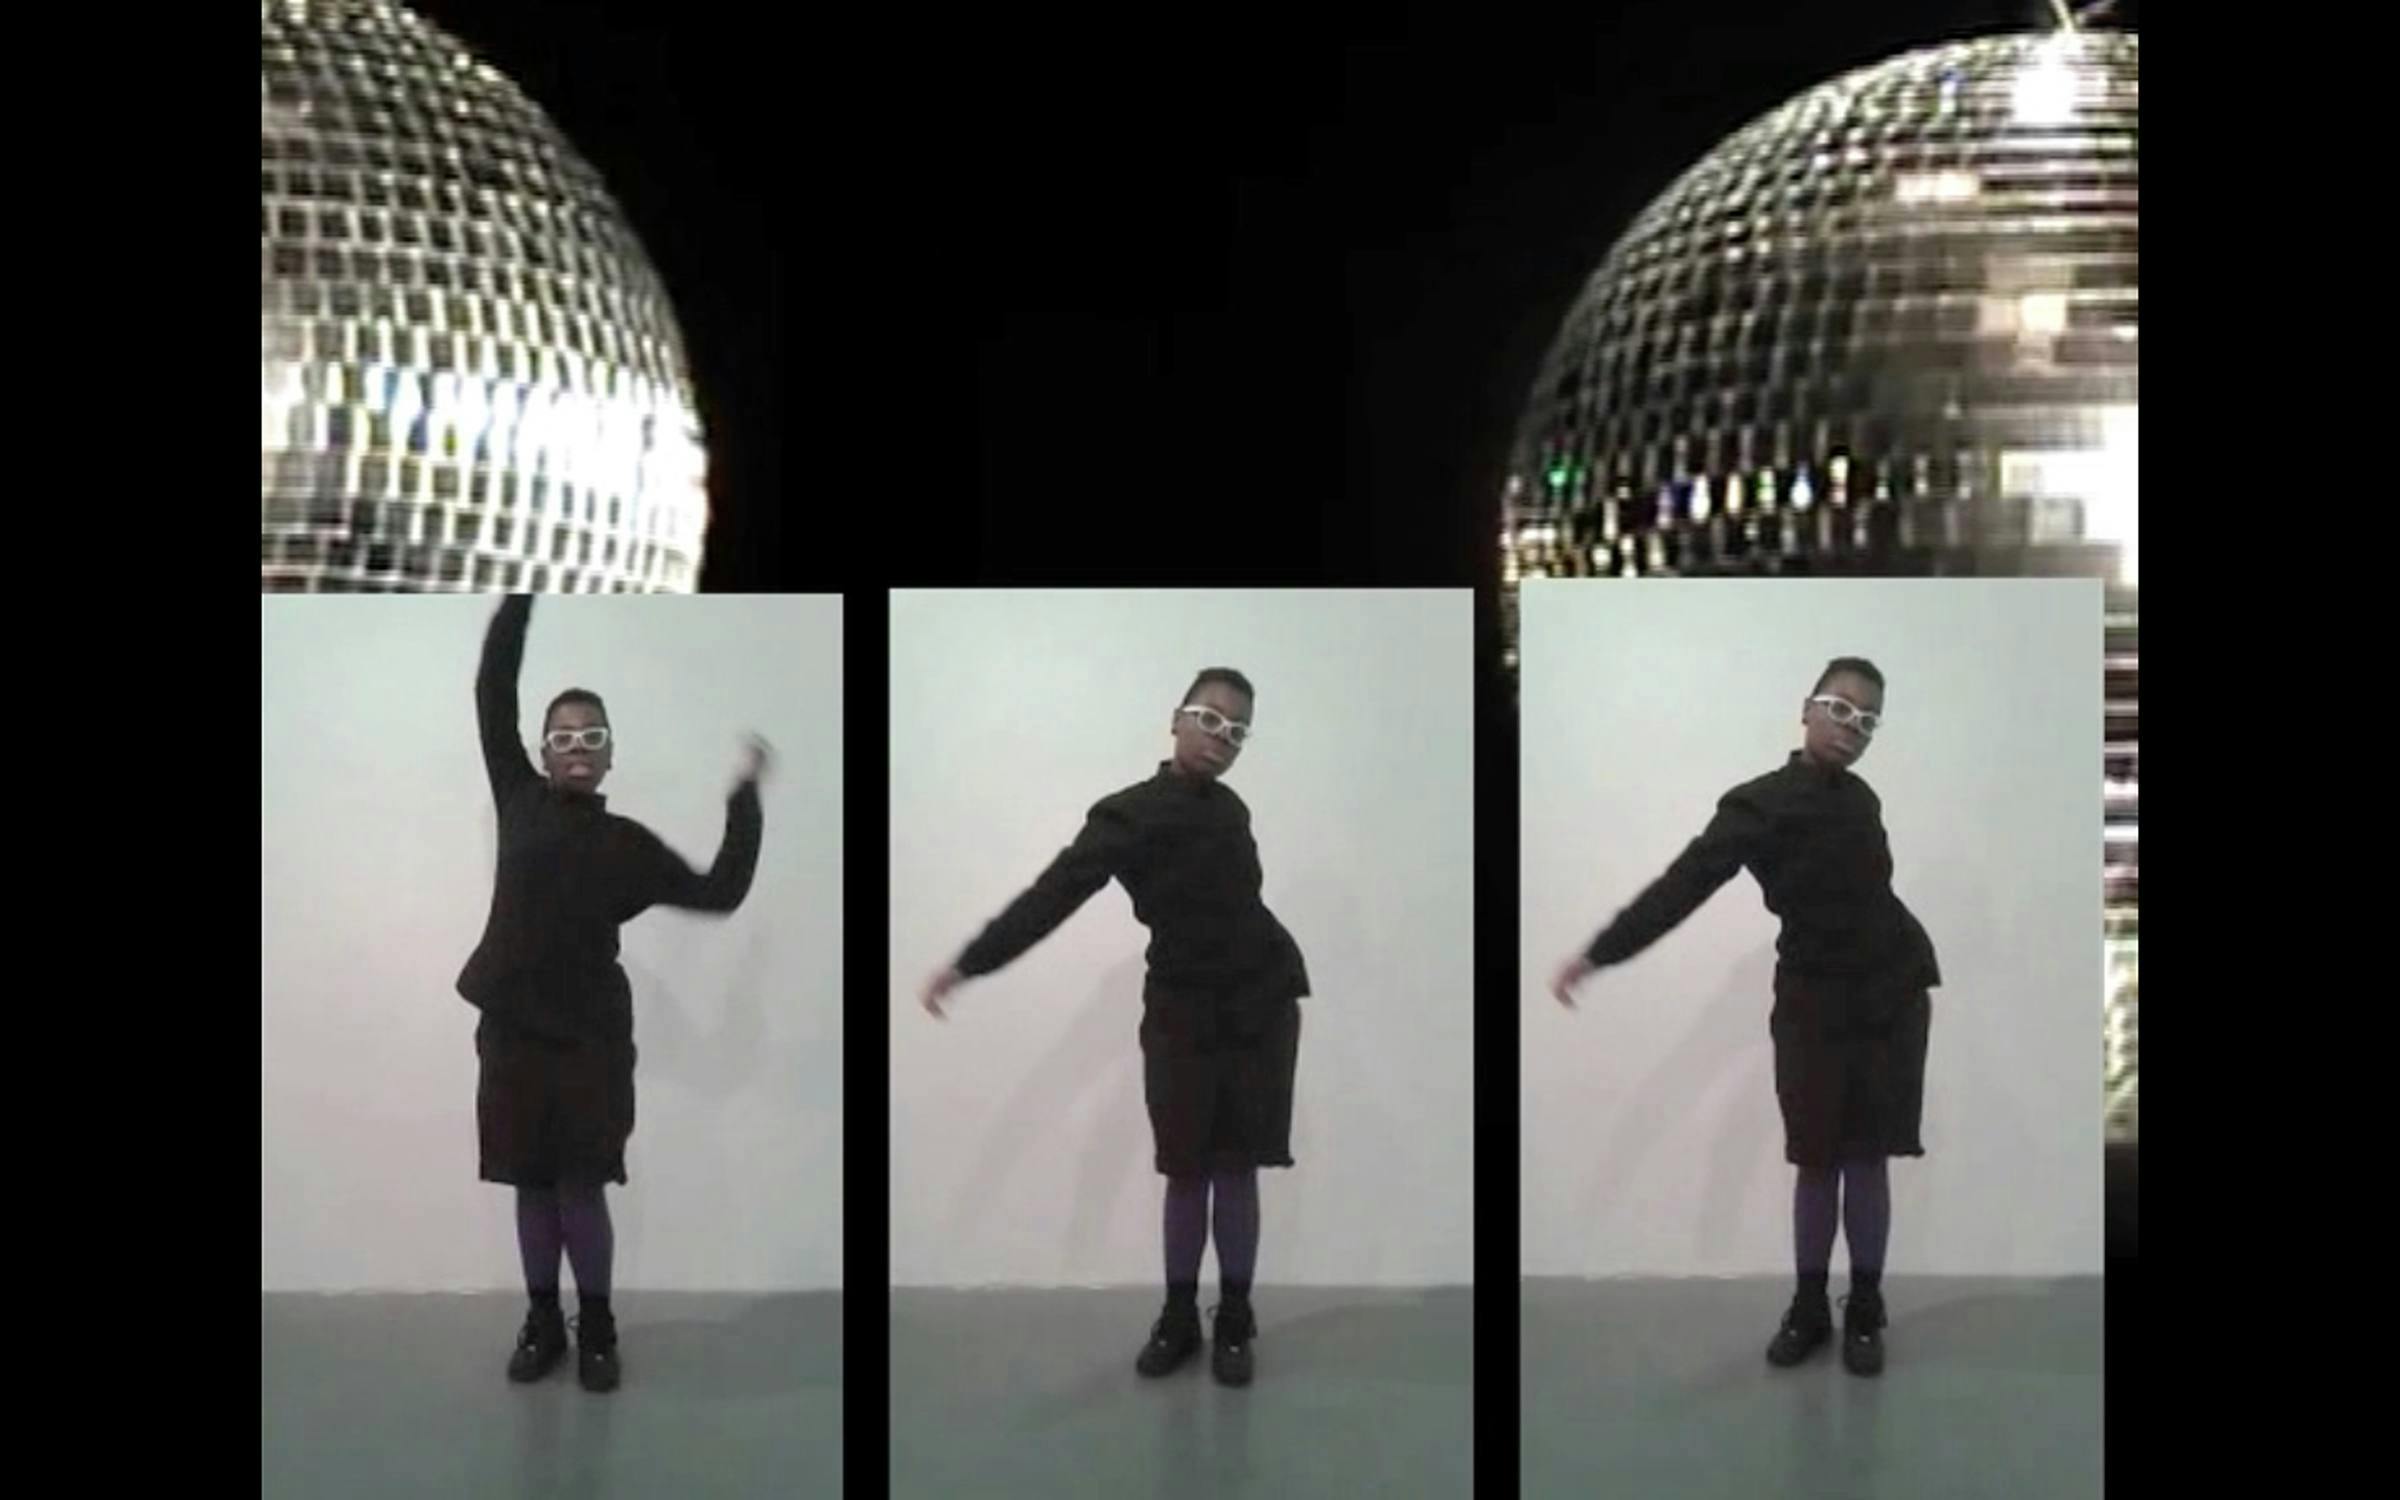 Three portrait images of the same person wearing black clothes wearing white glasses with their arms in different positions as if they are dancing. The images are superimposed on top of another image of two disco balls on a black background.